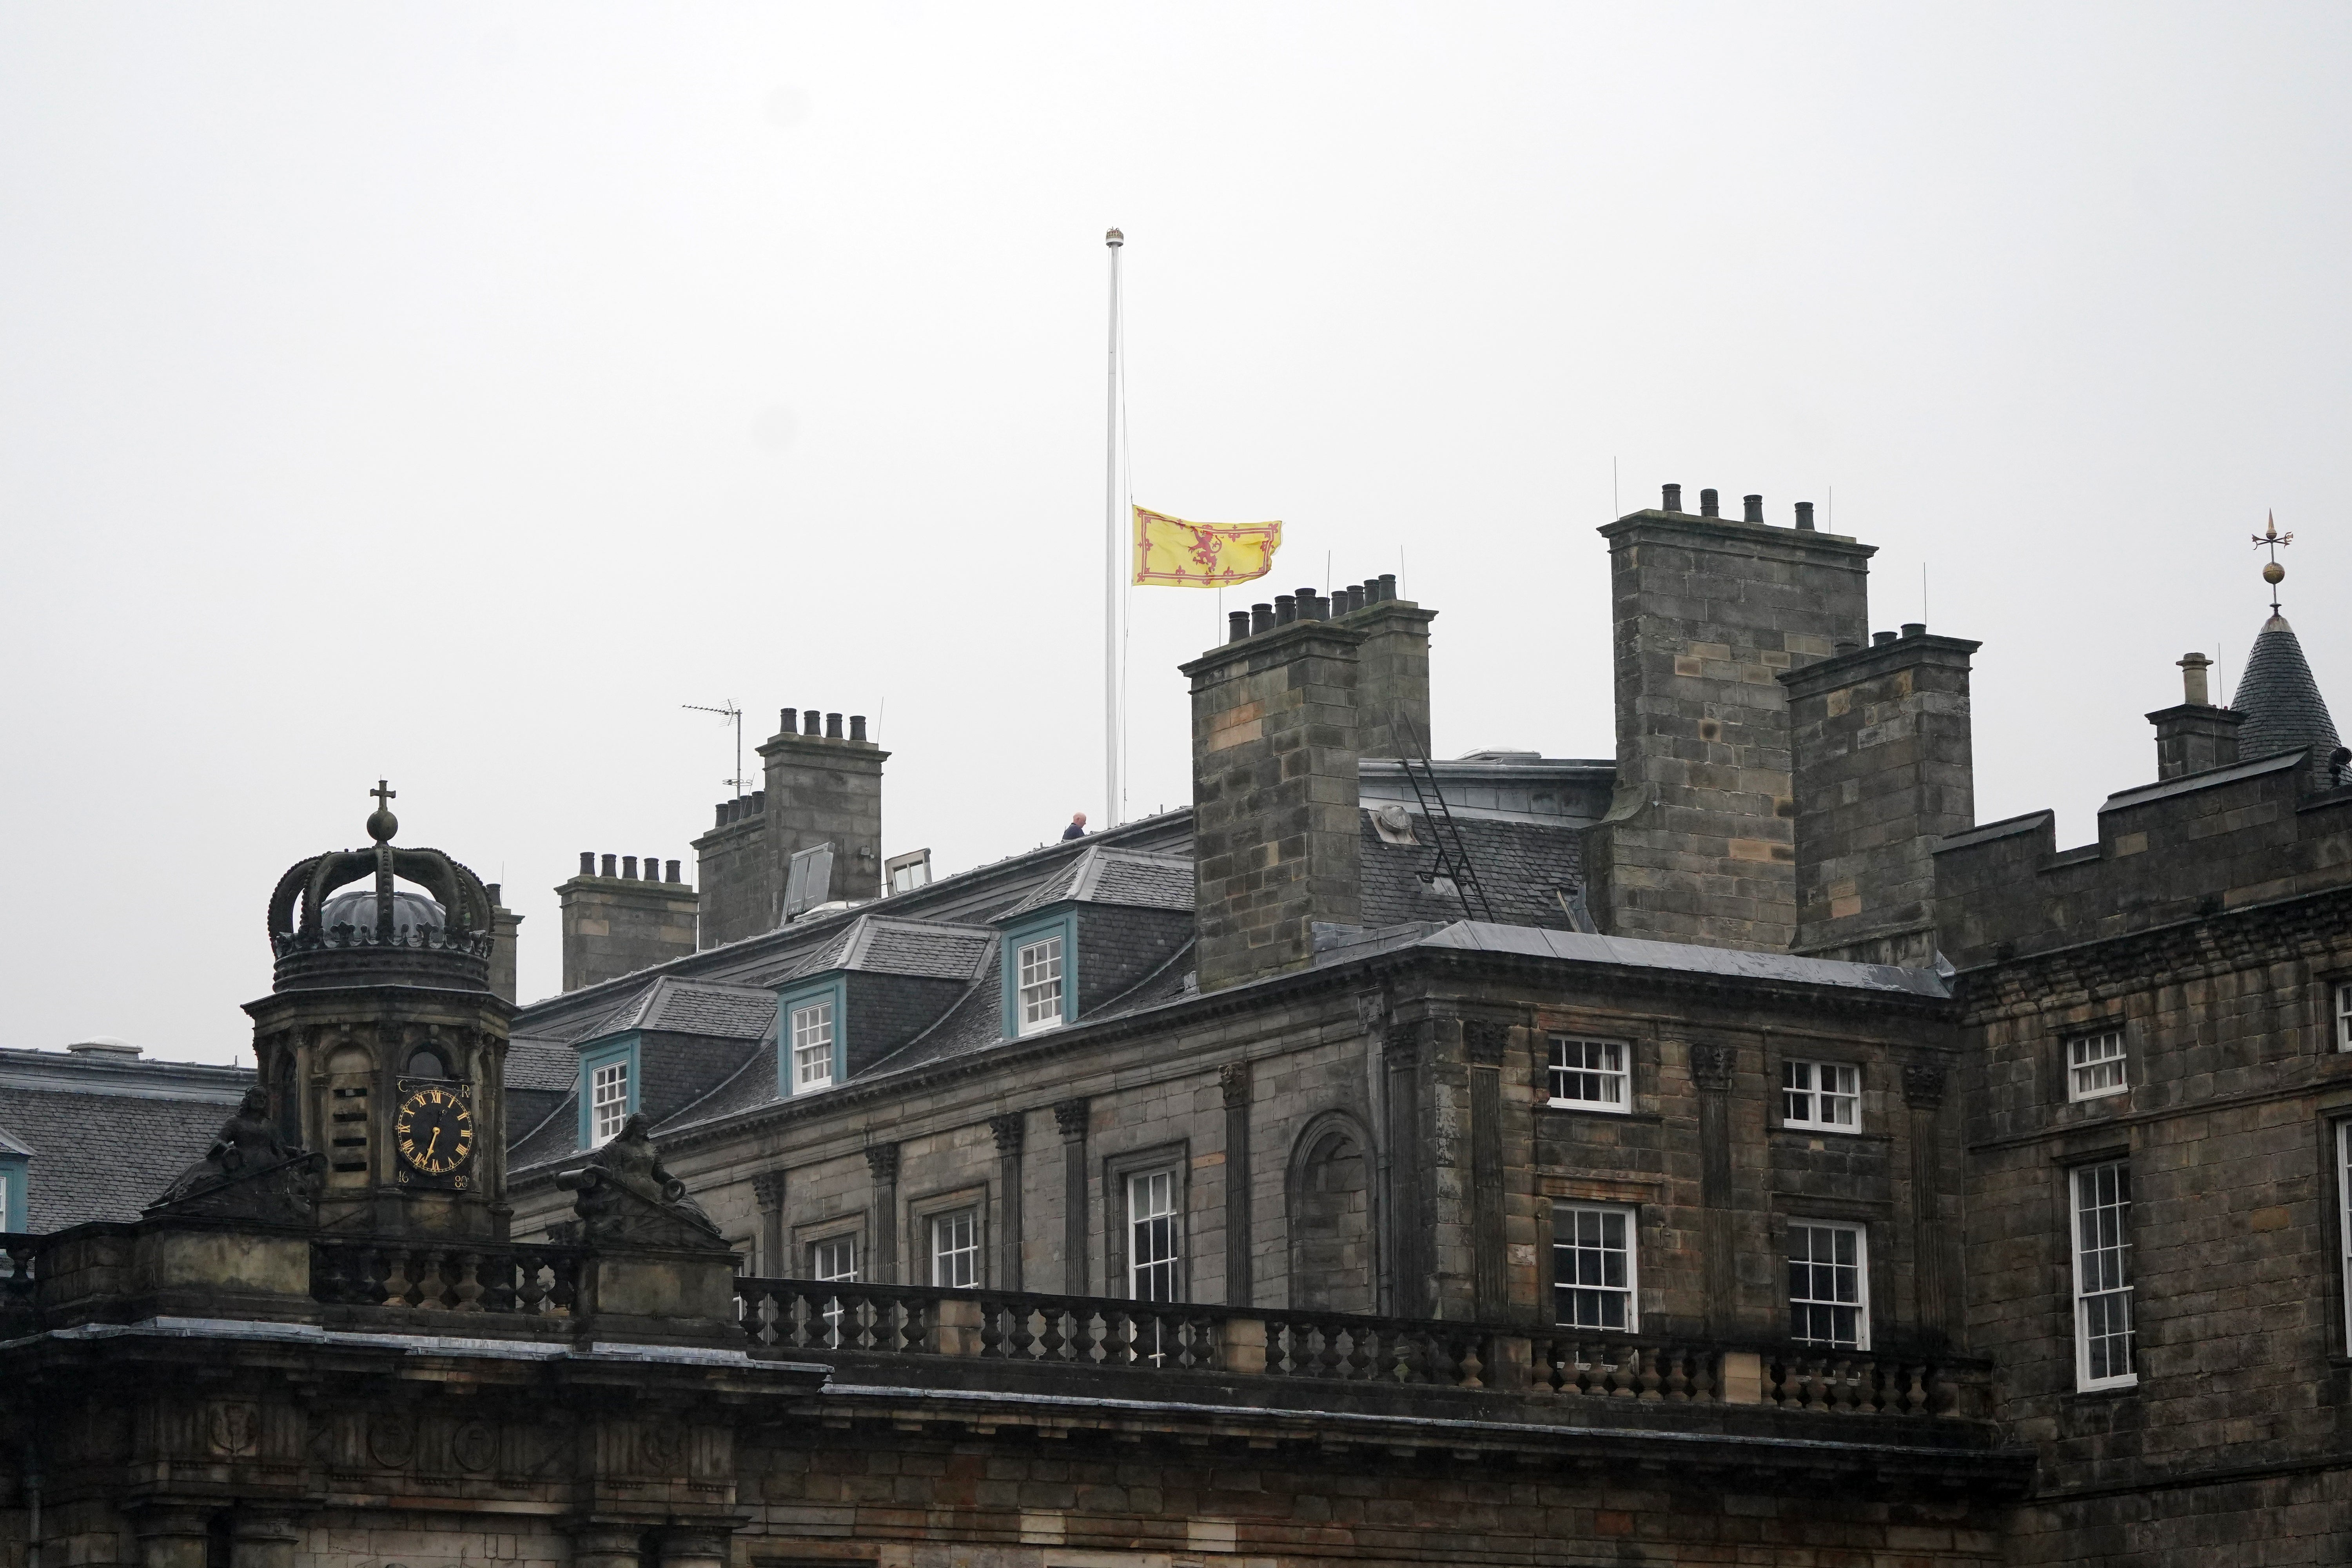 The Royal Banner of Scotland above the Palace of Holyroodhouse in Edinburgh is flown at half mast